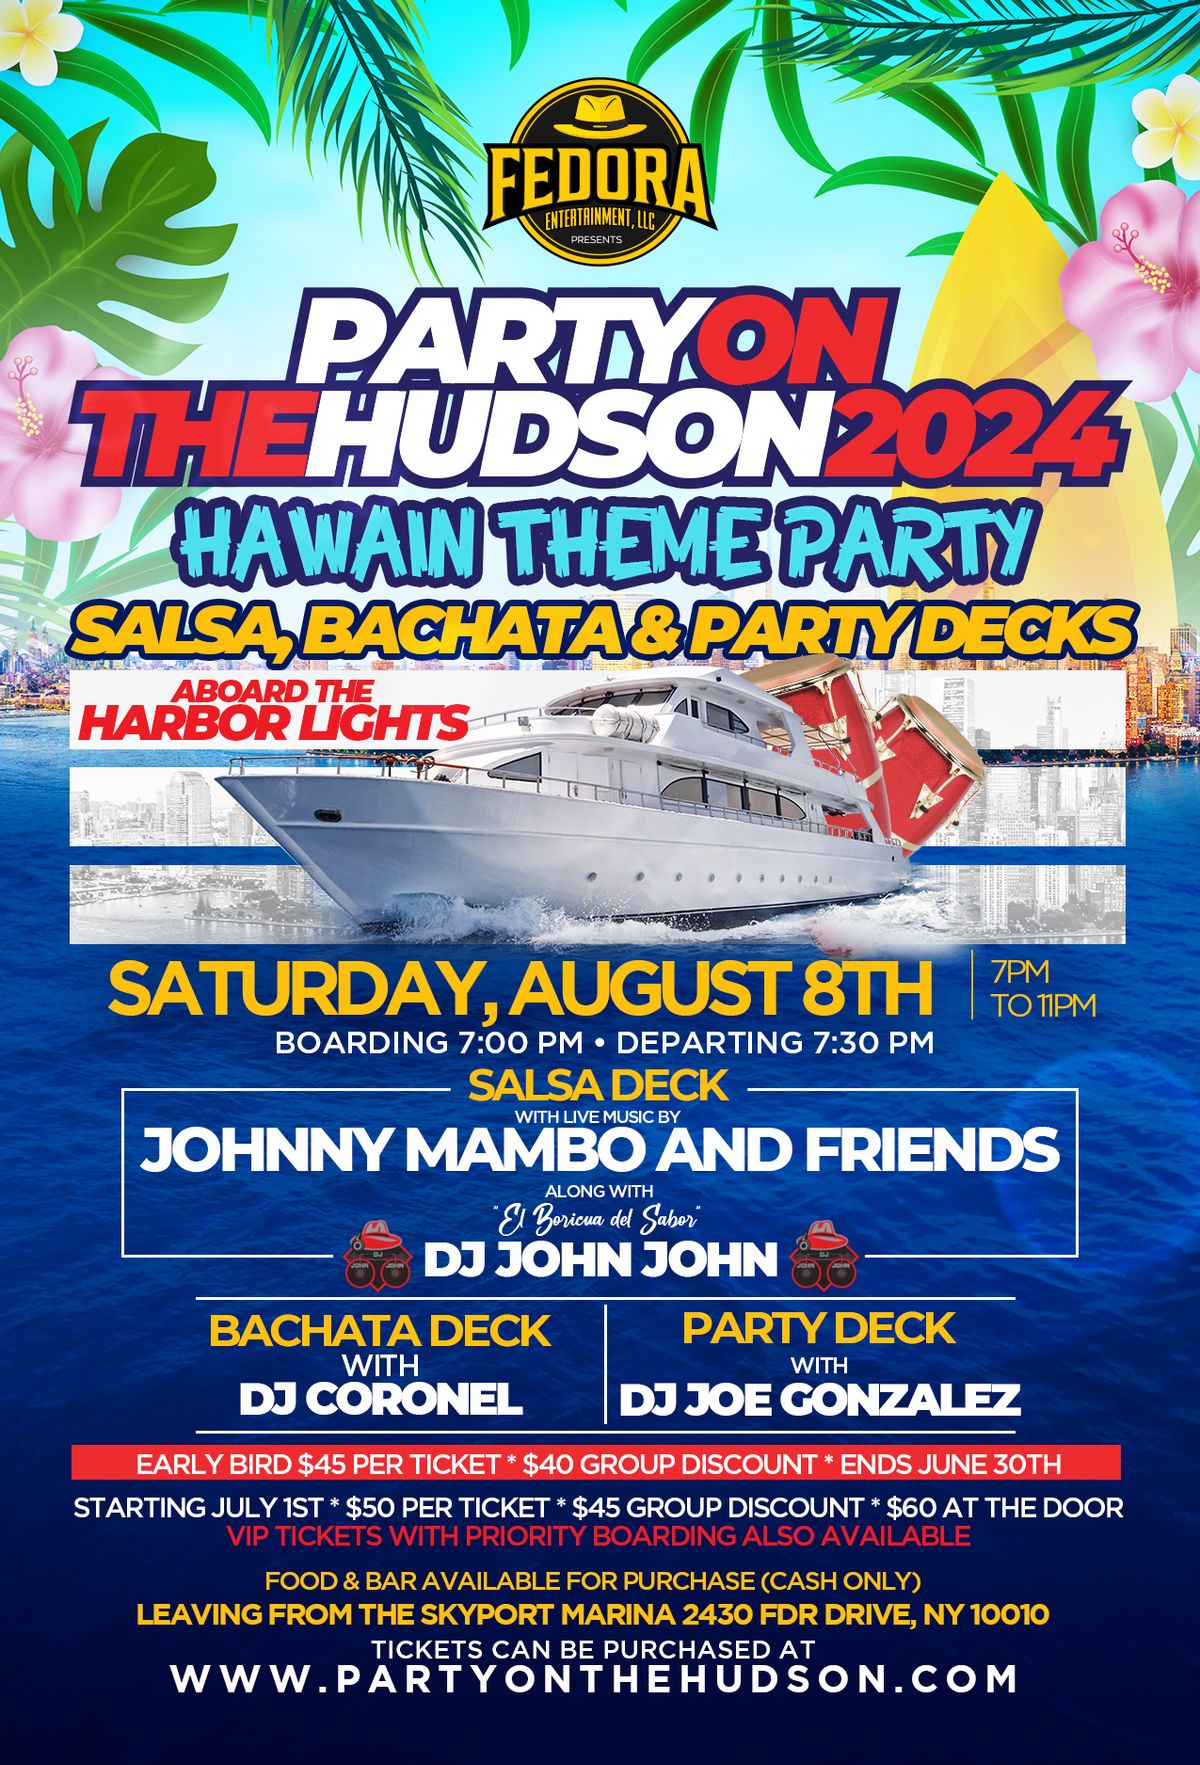 Party On The Hudson HAWAIIAN THEME PARTY with Live Music, Salsa, Bachata & Party Decks